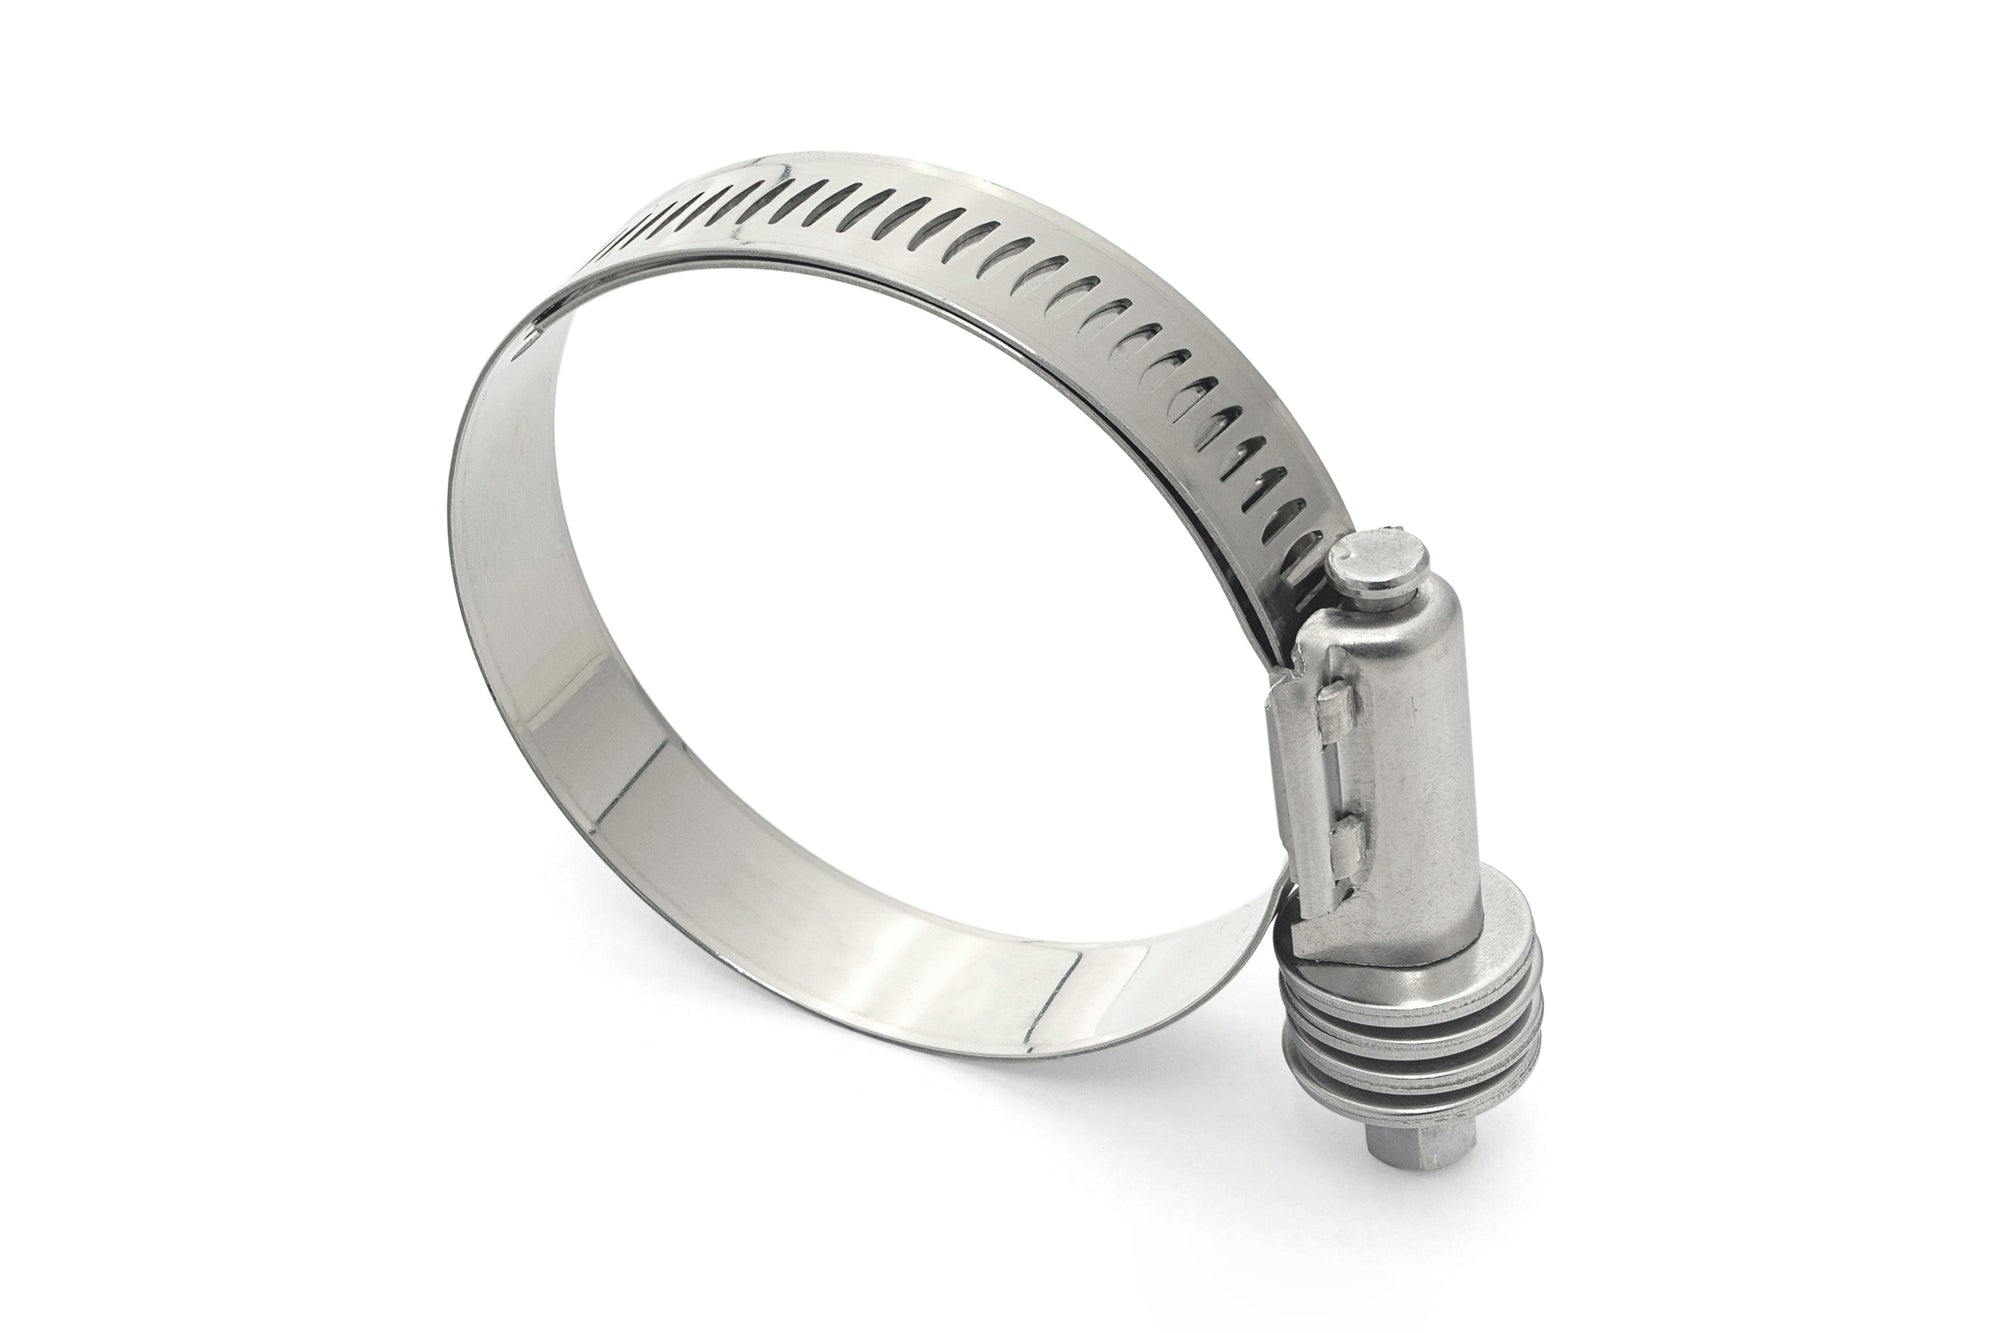 HPS Stainless Steel Constant Torque Hose Clamp CTF-275 1-13/16 2-3/4 inch 46mm - 70mm Size # 36